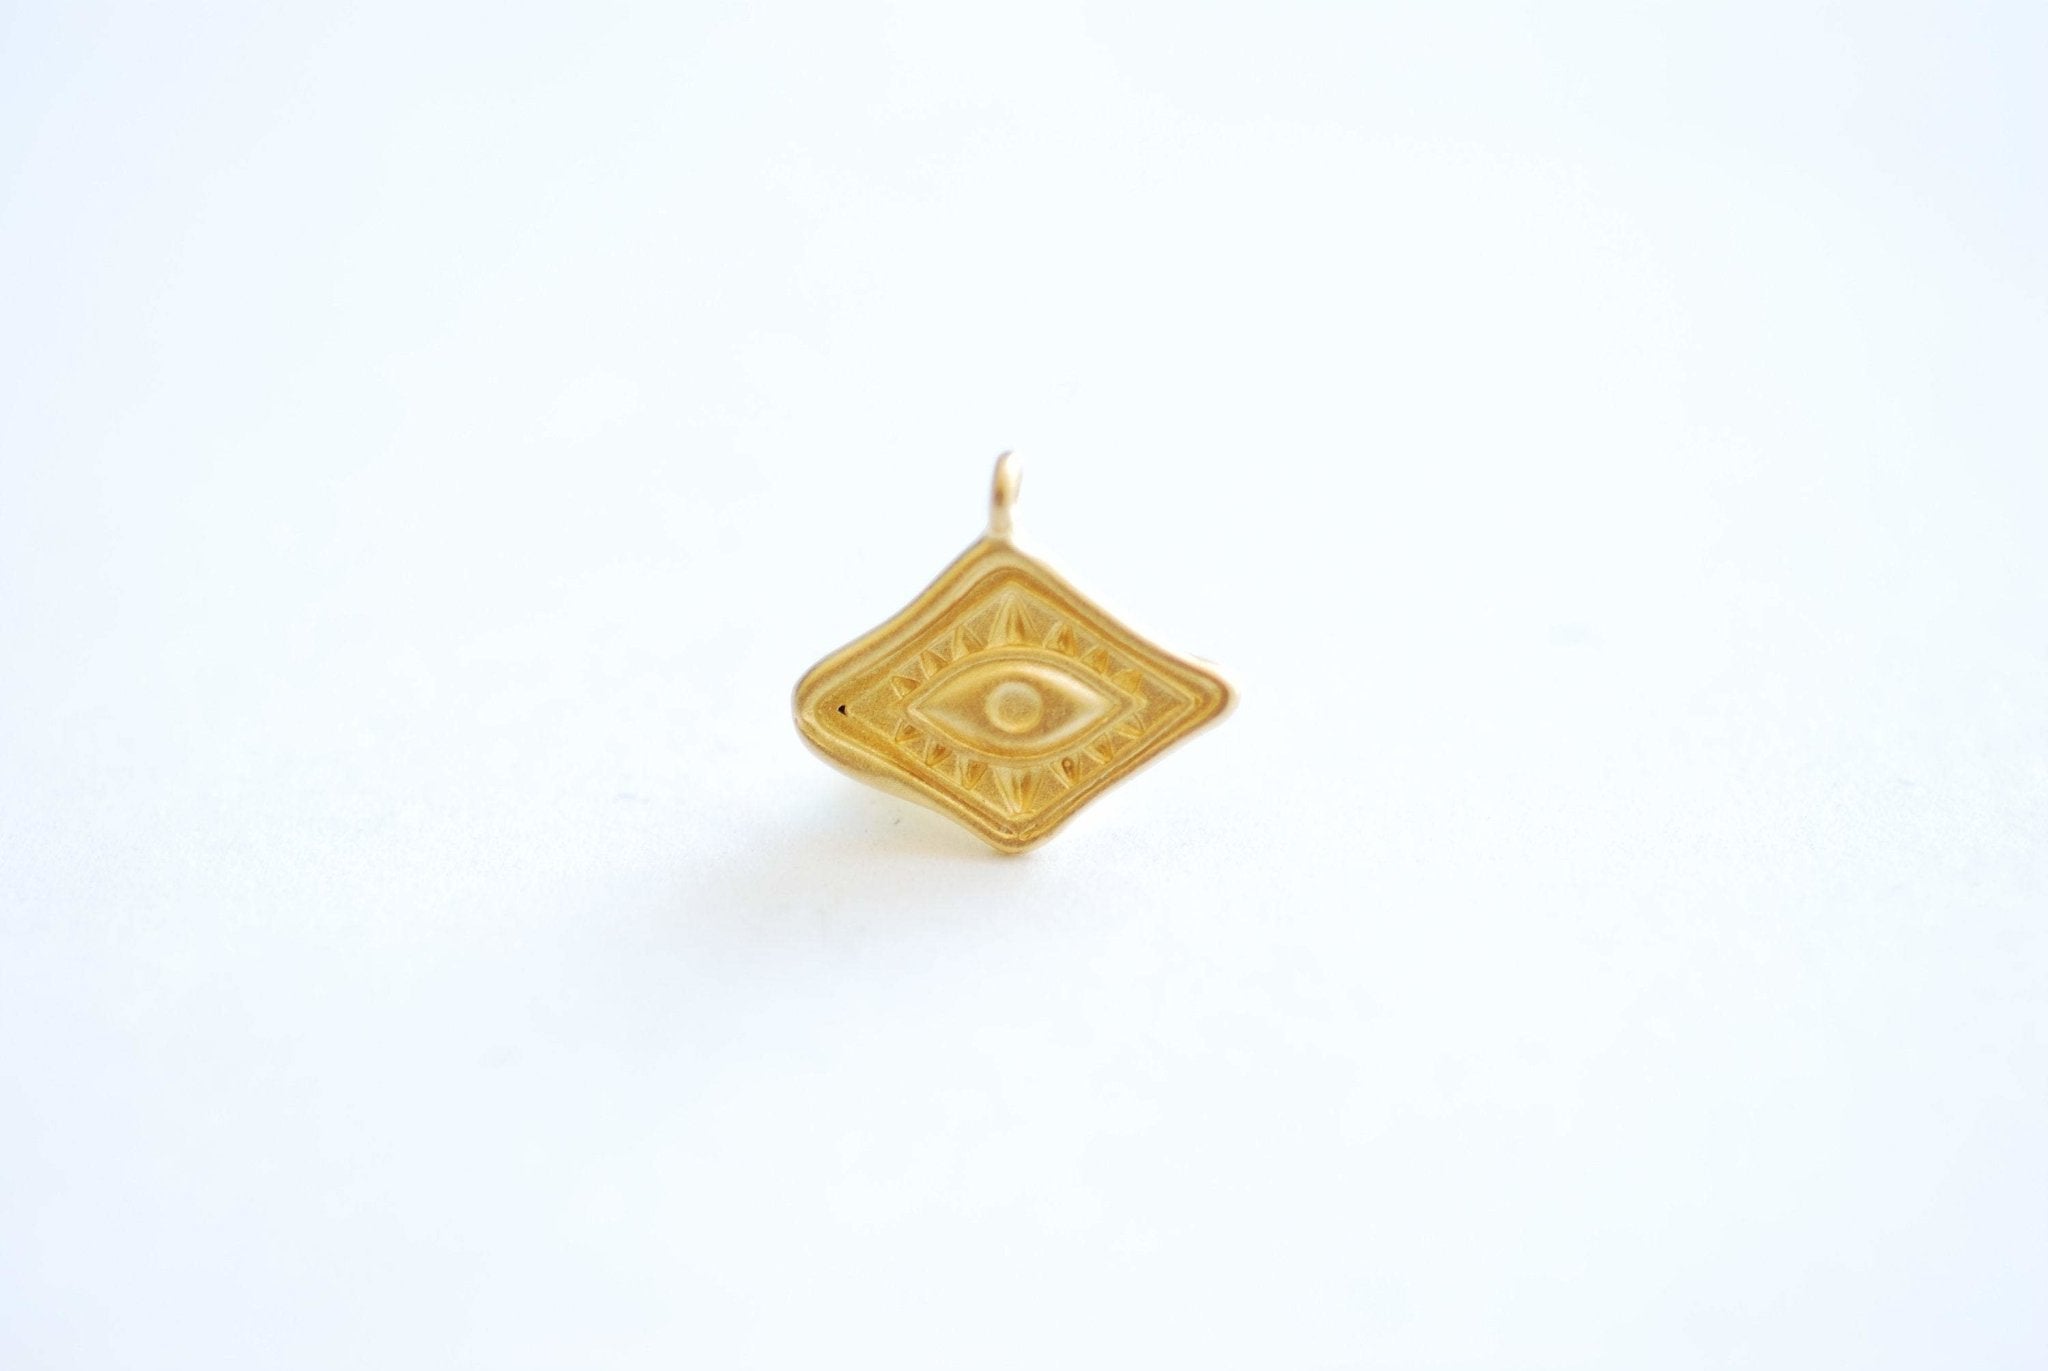 Small Evil Eye Charm - 18k vermeil gold plated 925 Sterling Silver, Diamond Shaped Evil Eye, Eye of Ra Good luck Protection, DIY Jewelry,495 - HarperCrown